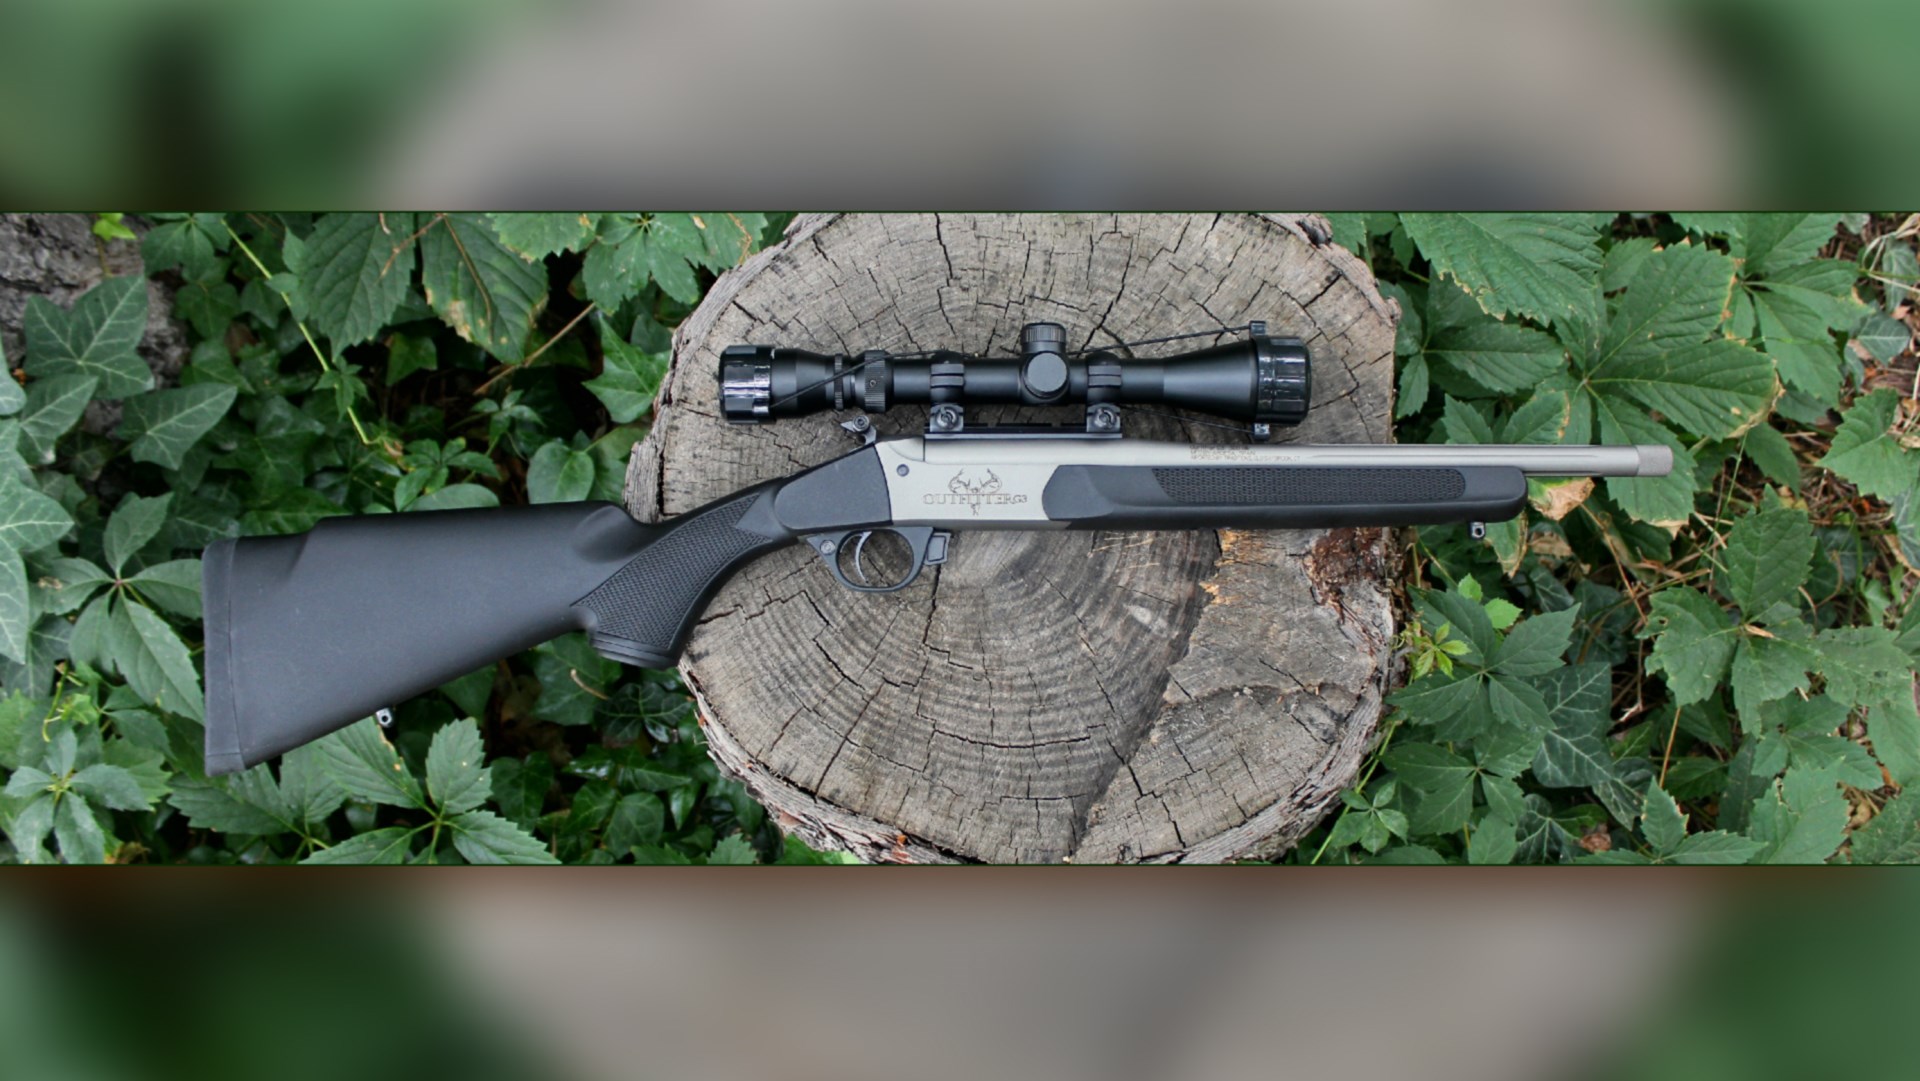 Right-side view Traditions Outfitter G3 single-shot rifle silver and black with riflescope resting on log with green leaves surrounding ghosted blurr overlay